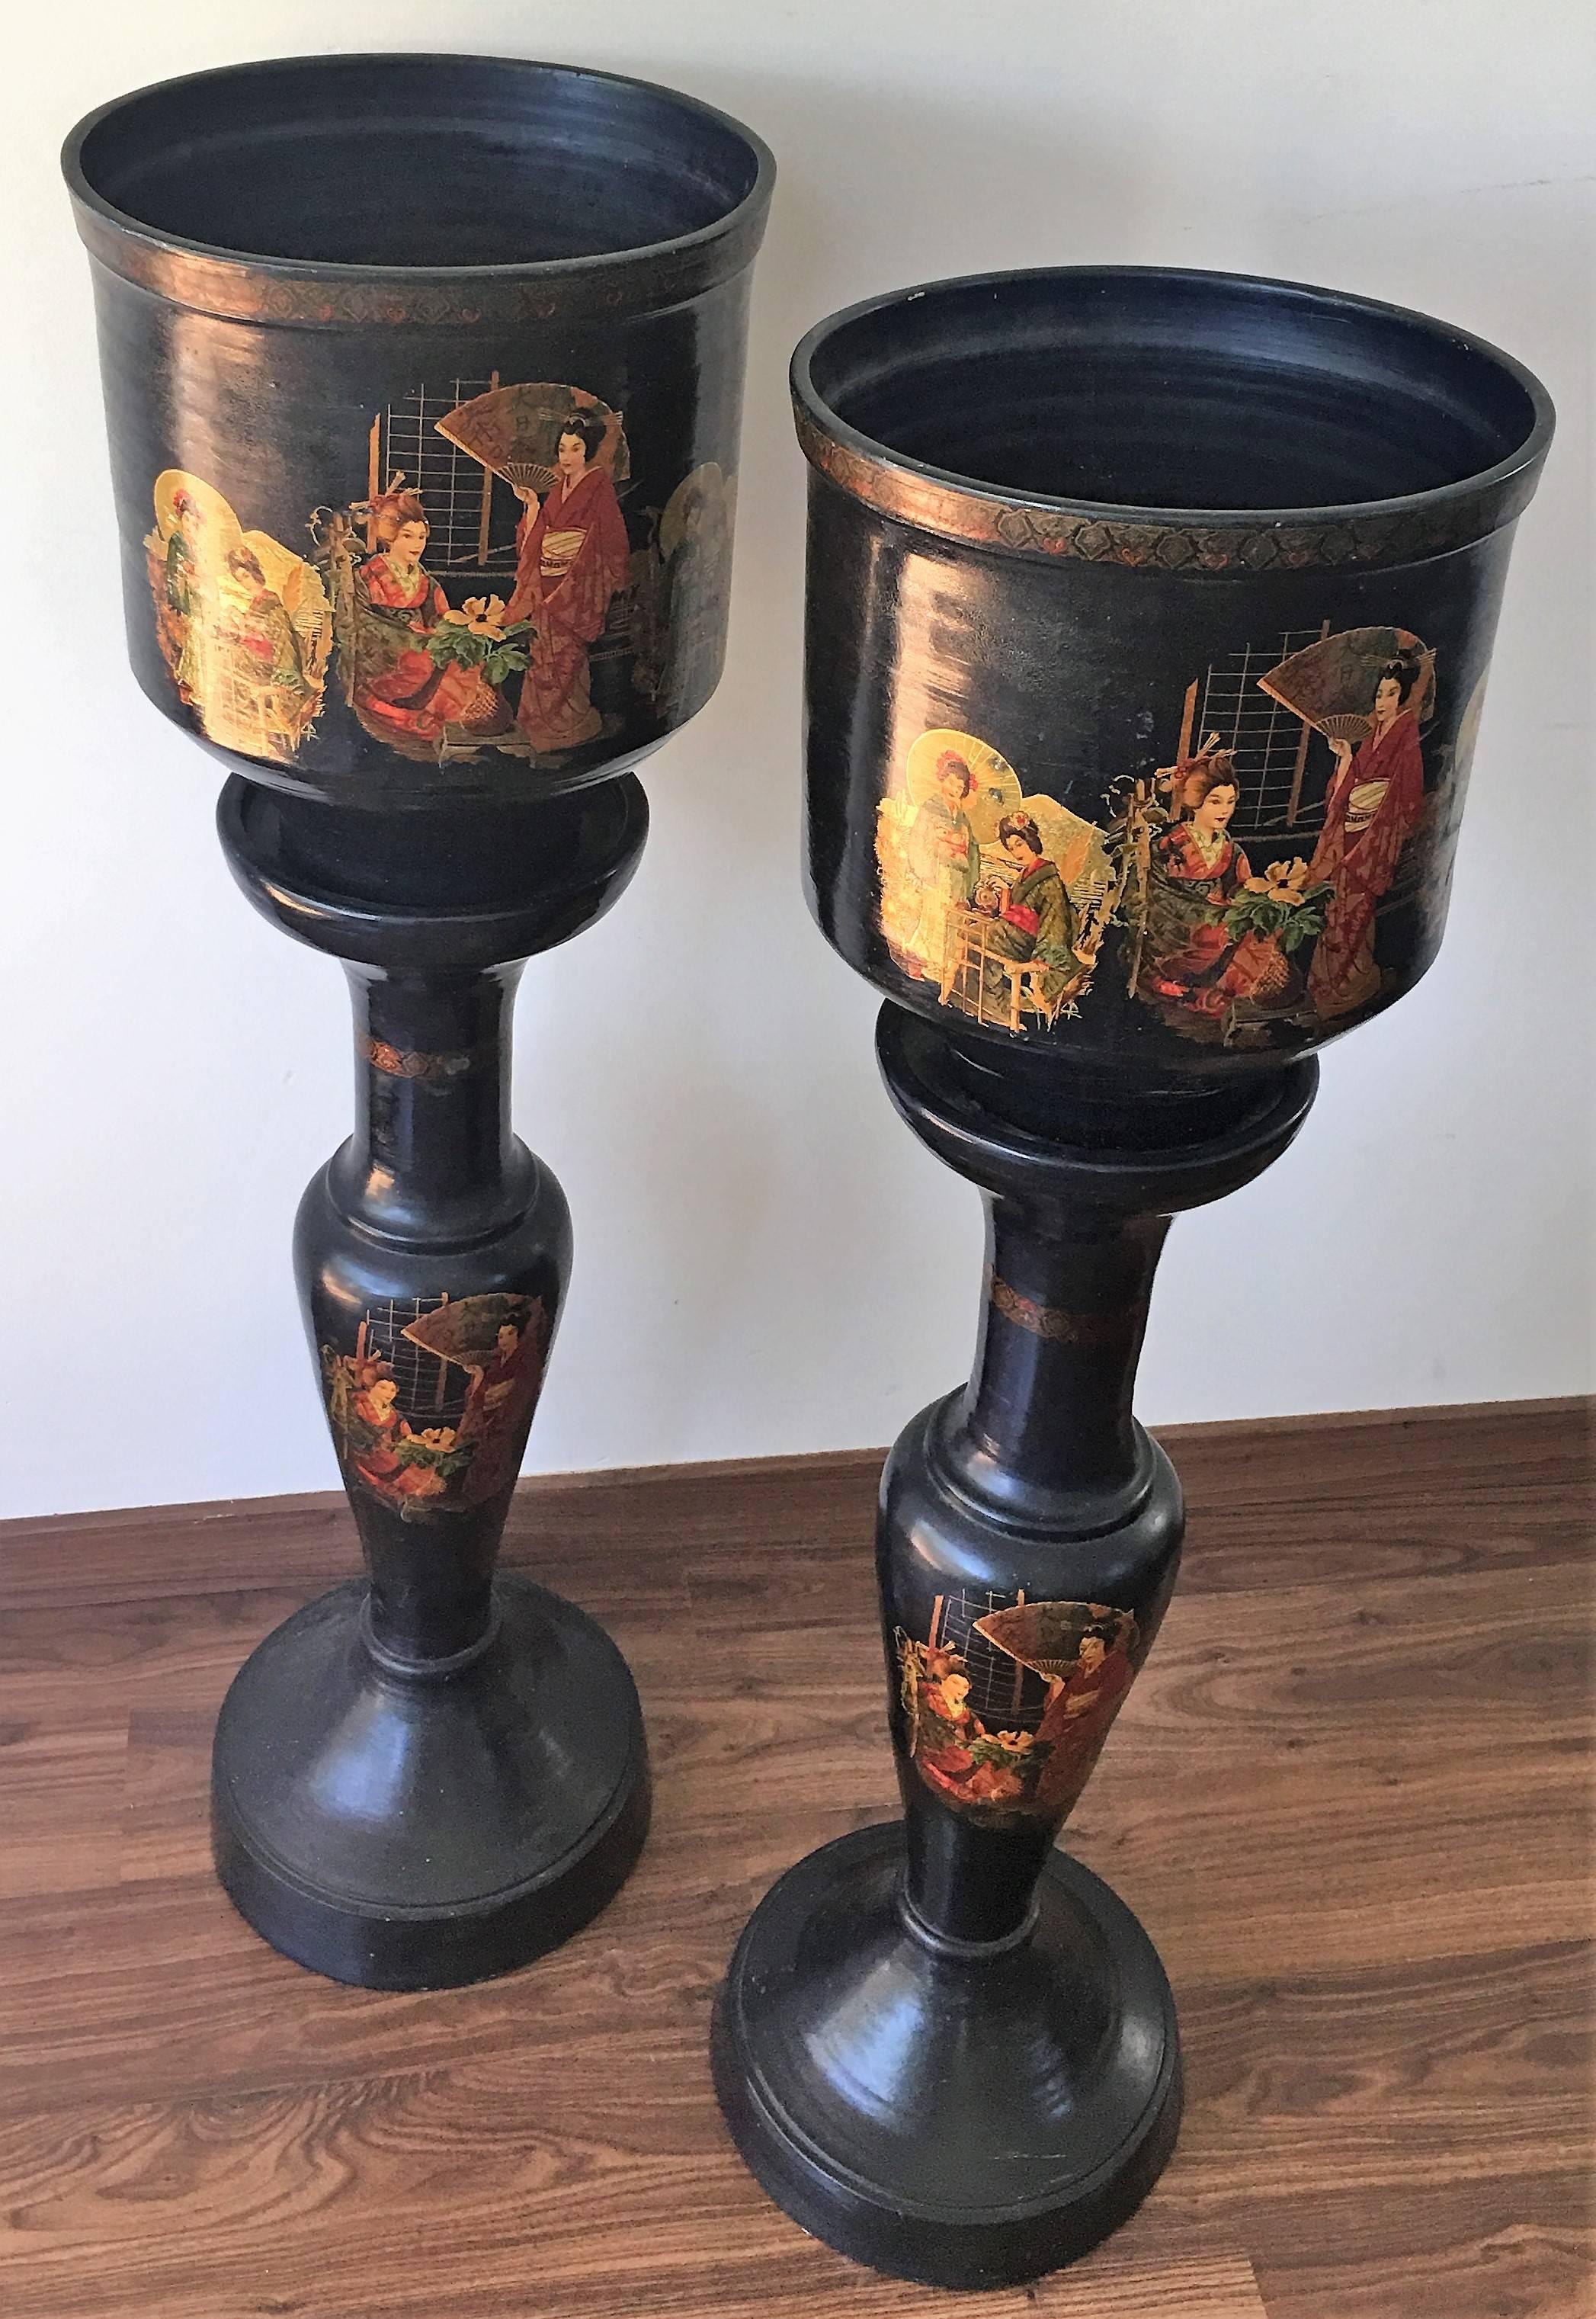 Pair of large chinoiserie style urns or vases on pedestals of glazed terracotta

Measurements:
Item A:
Pedestal: H 31.29 in, D 12.99 in, W 13.38 in
Total height with vase 45.66 in

Item B:
Pedestal: H 30.70 in, D 12.79 in, W 12.79 in
Total